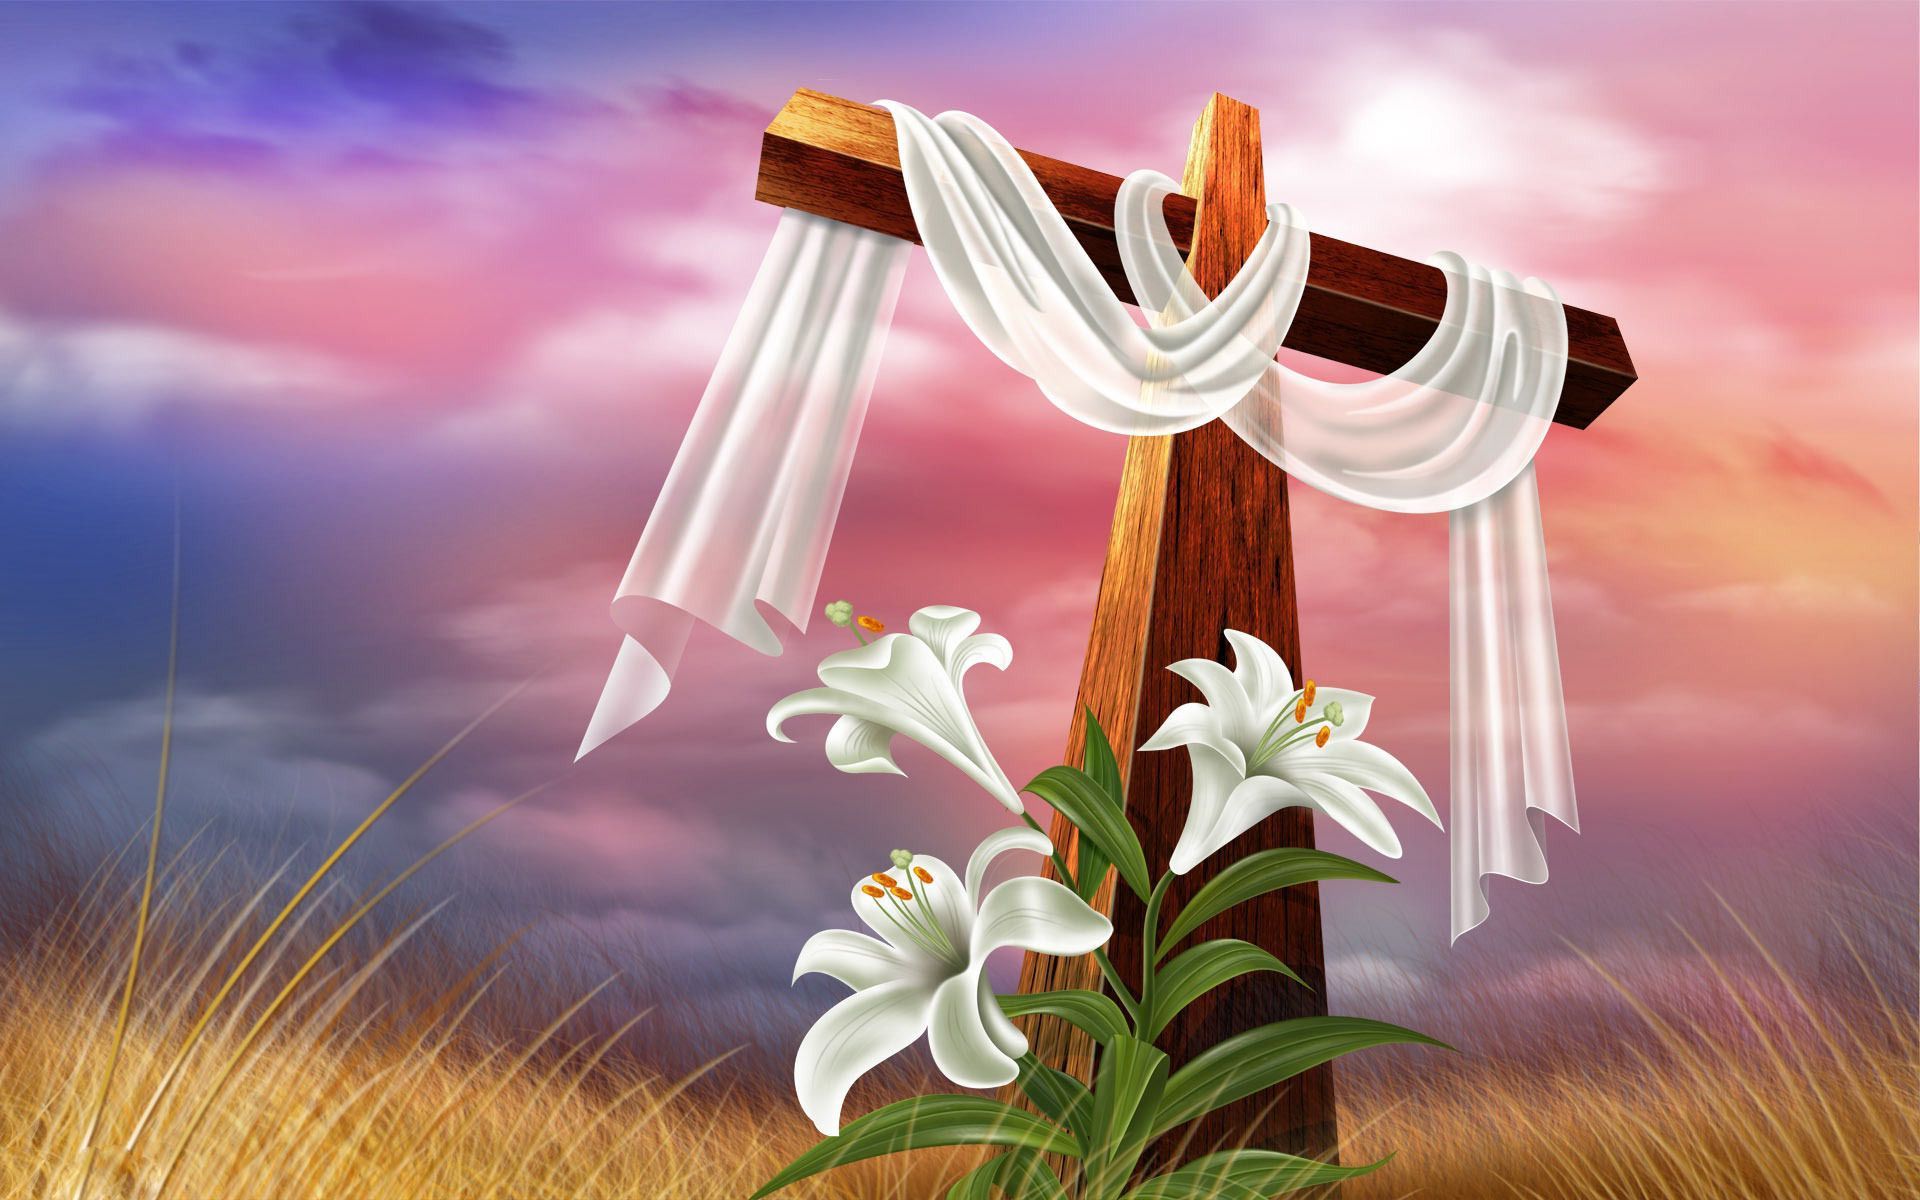 Easter 2019 Picture Photo HD Wallpaper Free Download. Easter